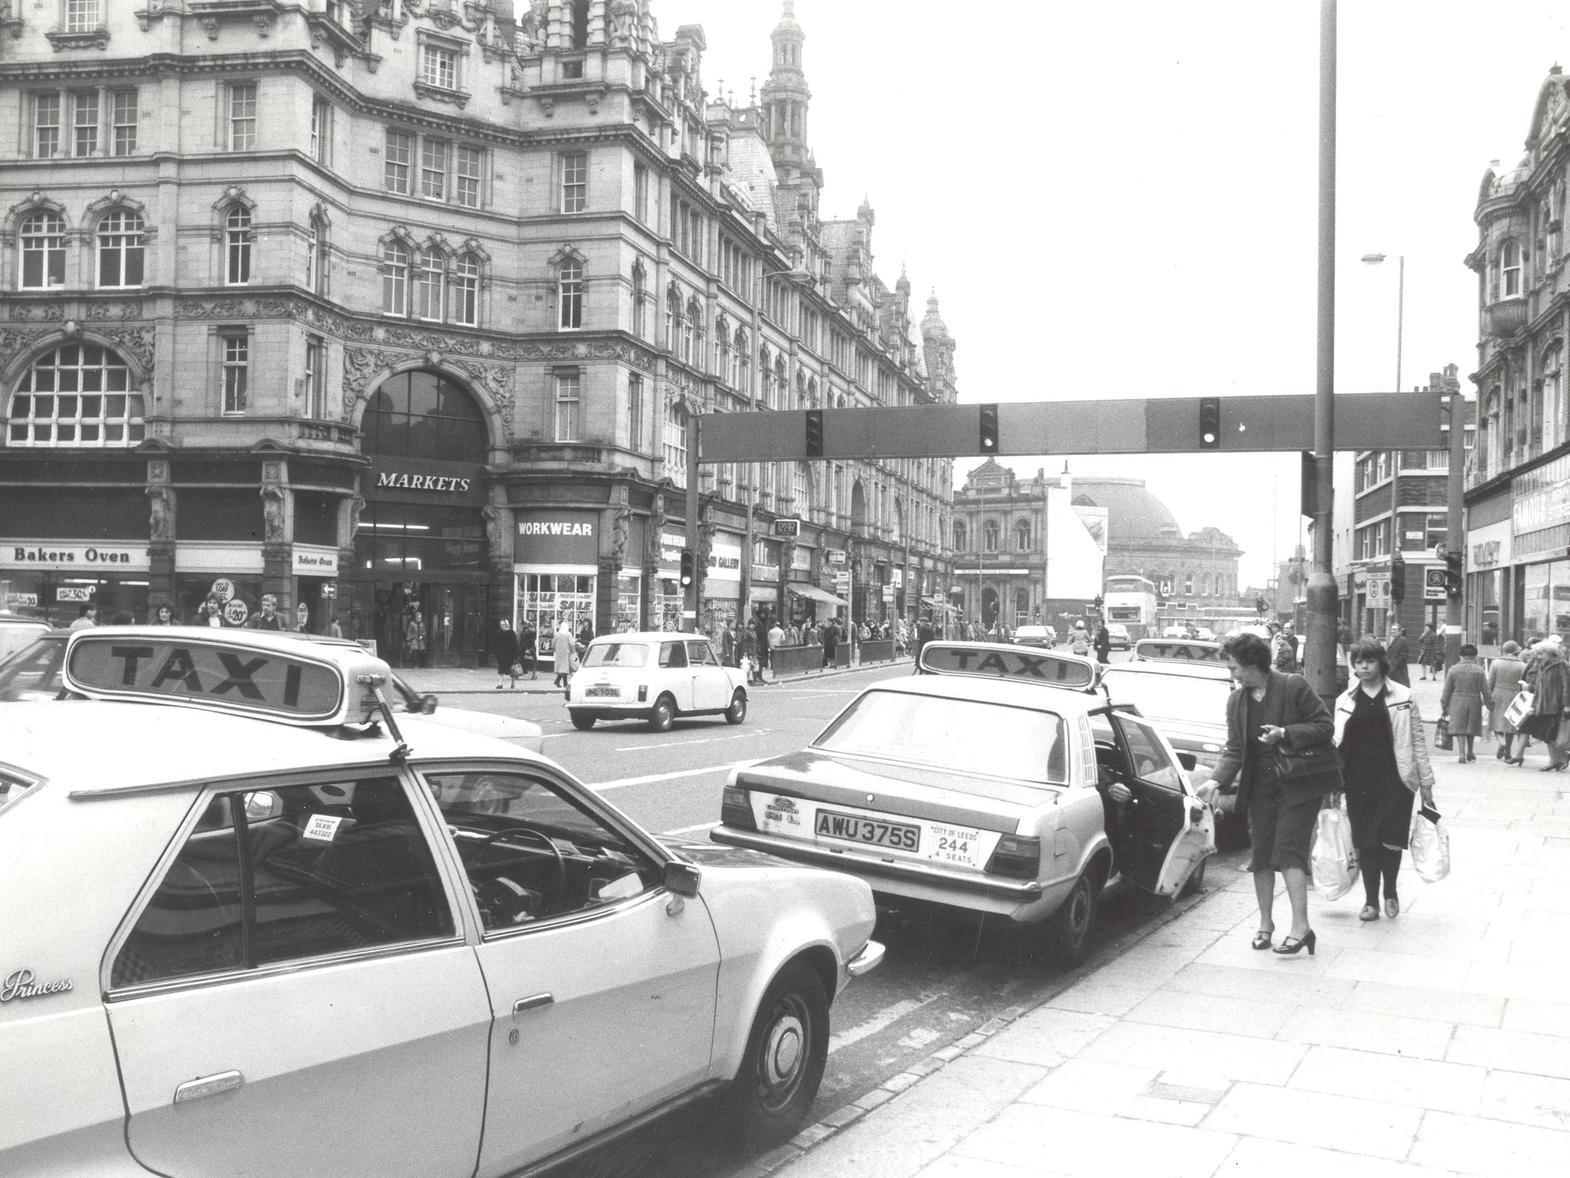 A view of Vicar Lane in the early 1980s. You can see the Corn Exchange in the distance.